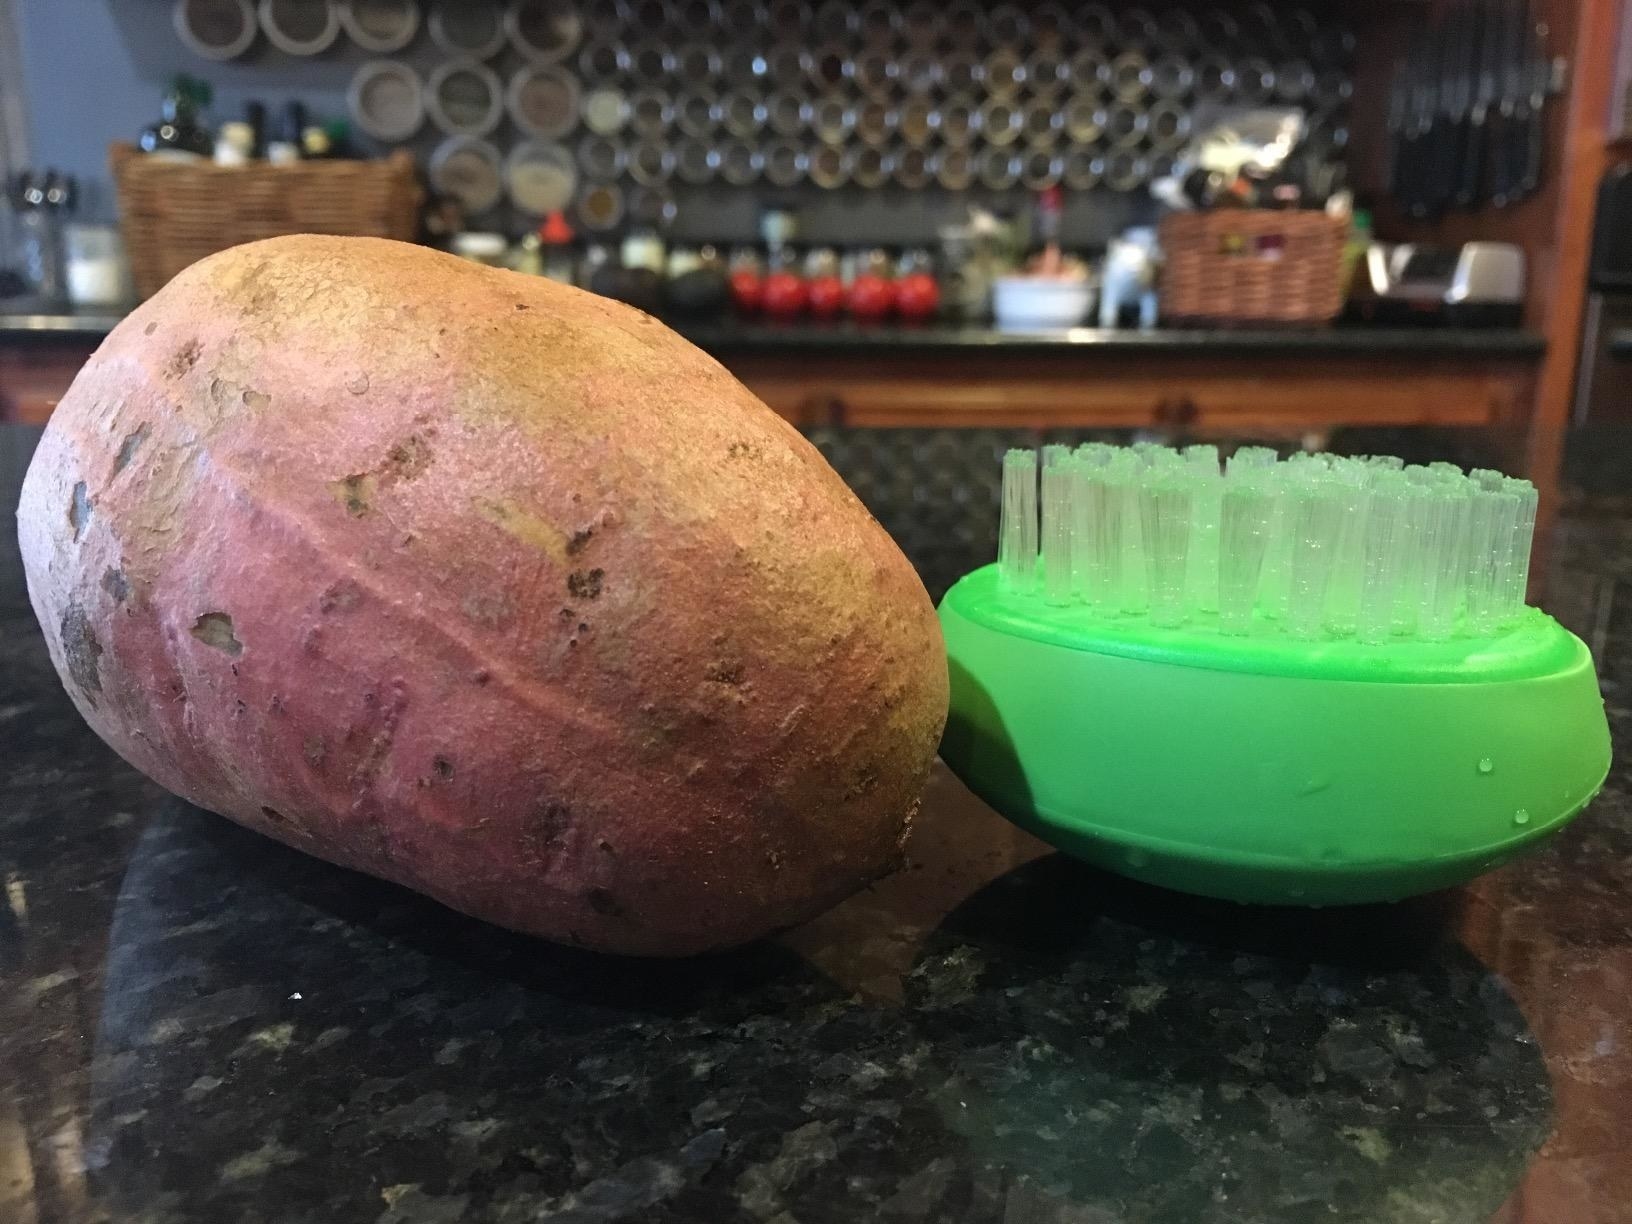 Reviewer image of scrubber next to a potato